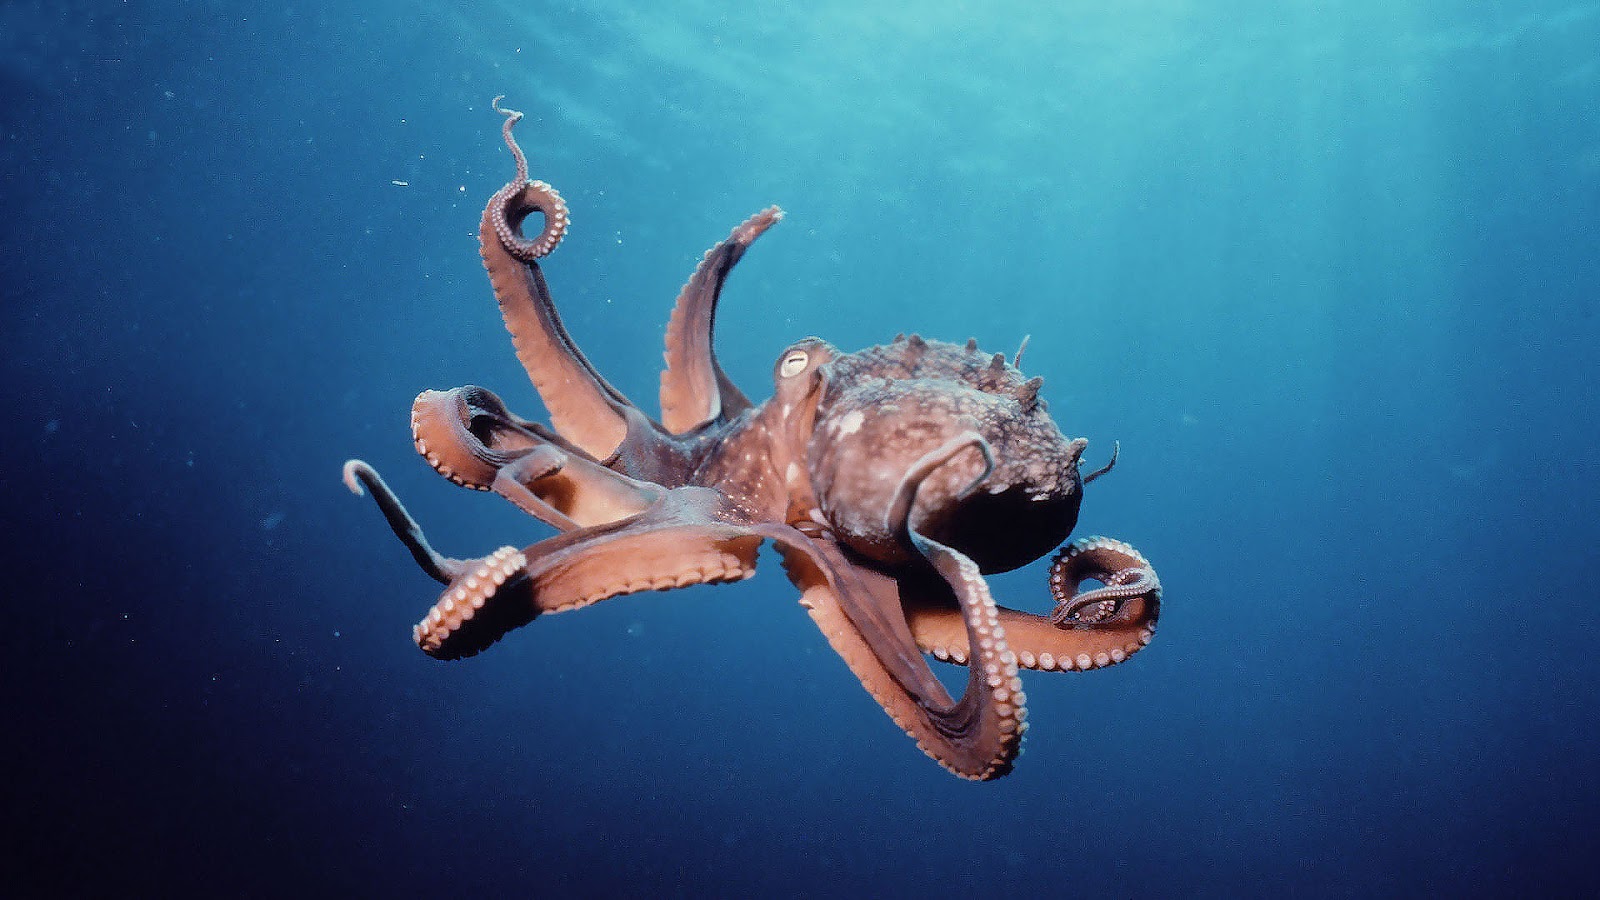 http://4.bp.blogspot.com/-IEG0lu12dvs/UDfzldRbY8I/AAAAAAAABDc/PG009B4imSc/s1600/hd-octopus-wallpaper-with-a-red-octopus-swimming-underwater-octupus-wallpapers-backgrounds-pictures-photos.jpg